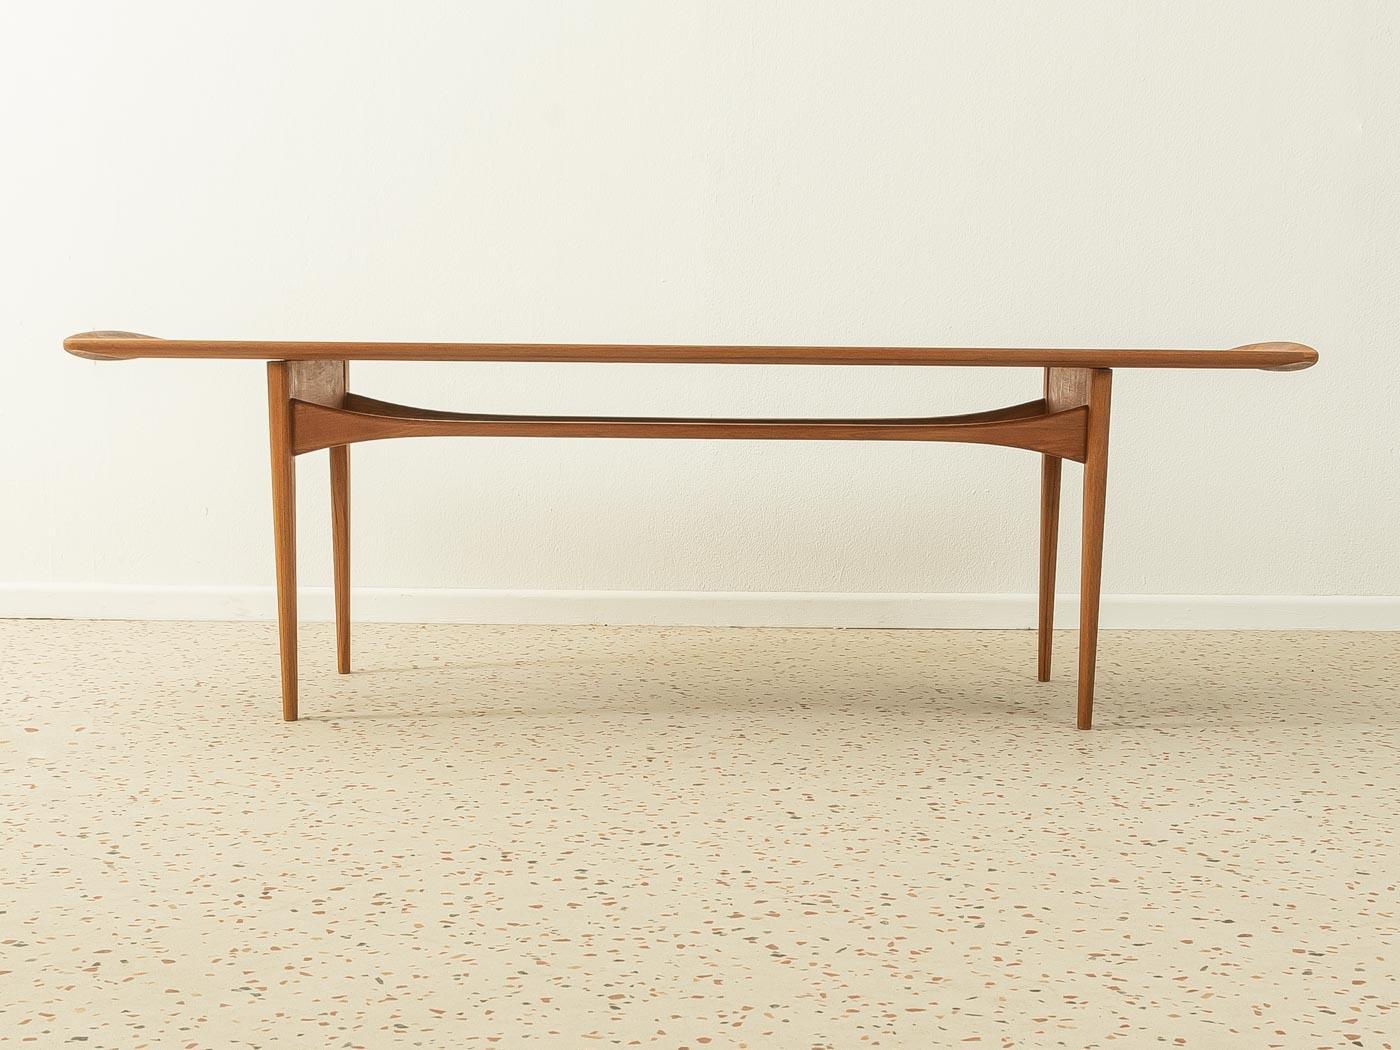 Classic coffee table from the 1960s by Tove & Edvard Kindt-Larsen for France & Daverkosen. Solid frame and table top in teak.

Quality features:
- accomplished design: perfect proportions and visible attention to detail
- high-quality